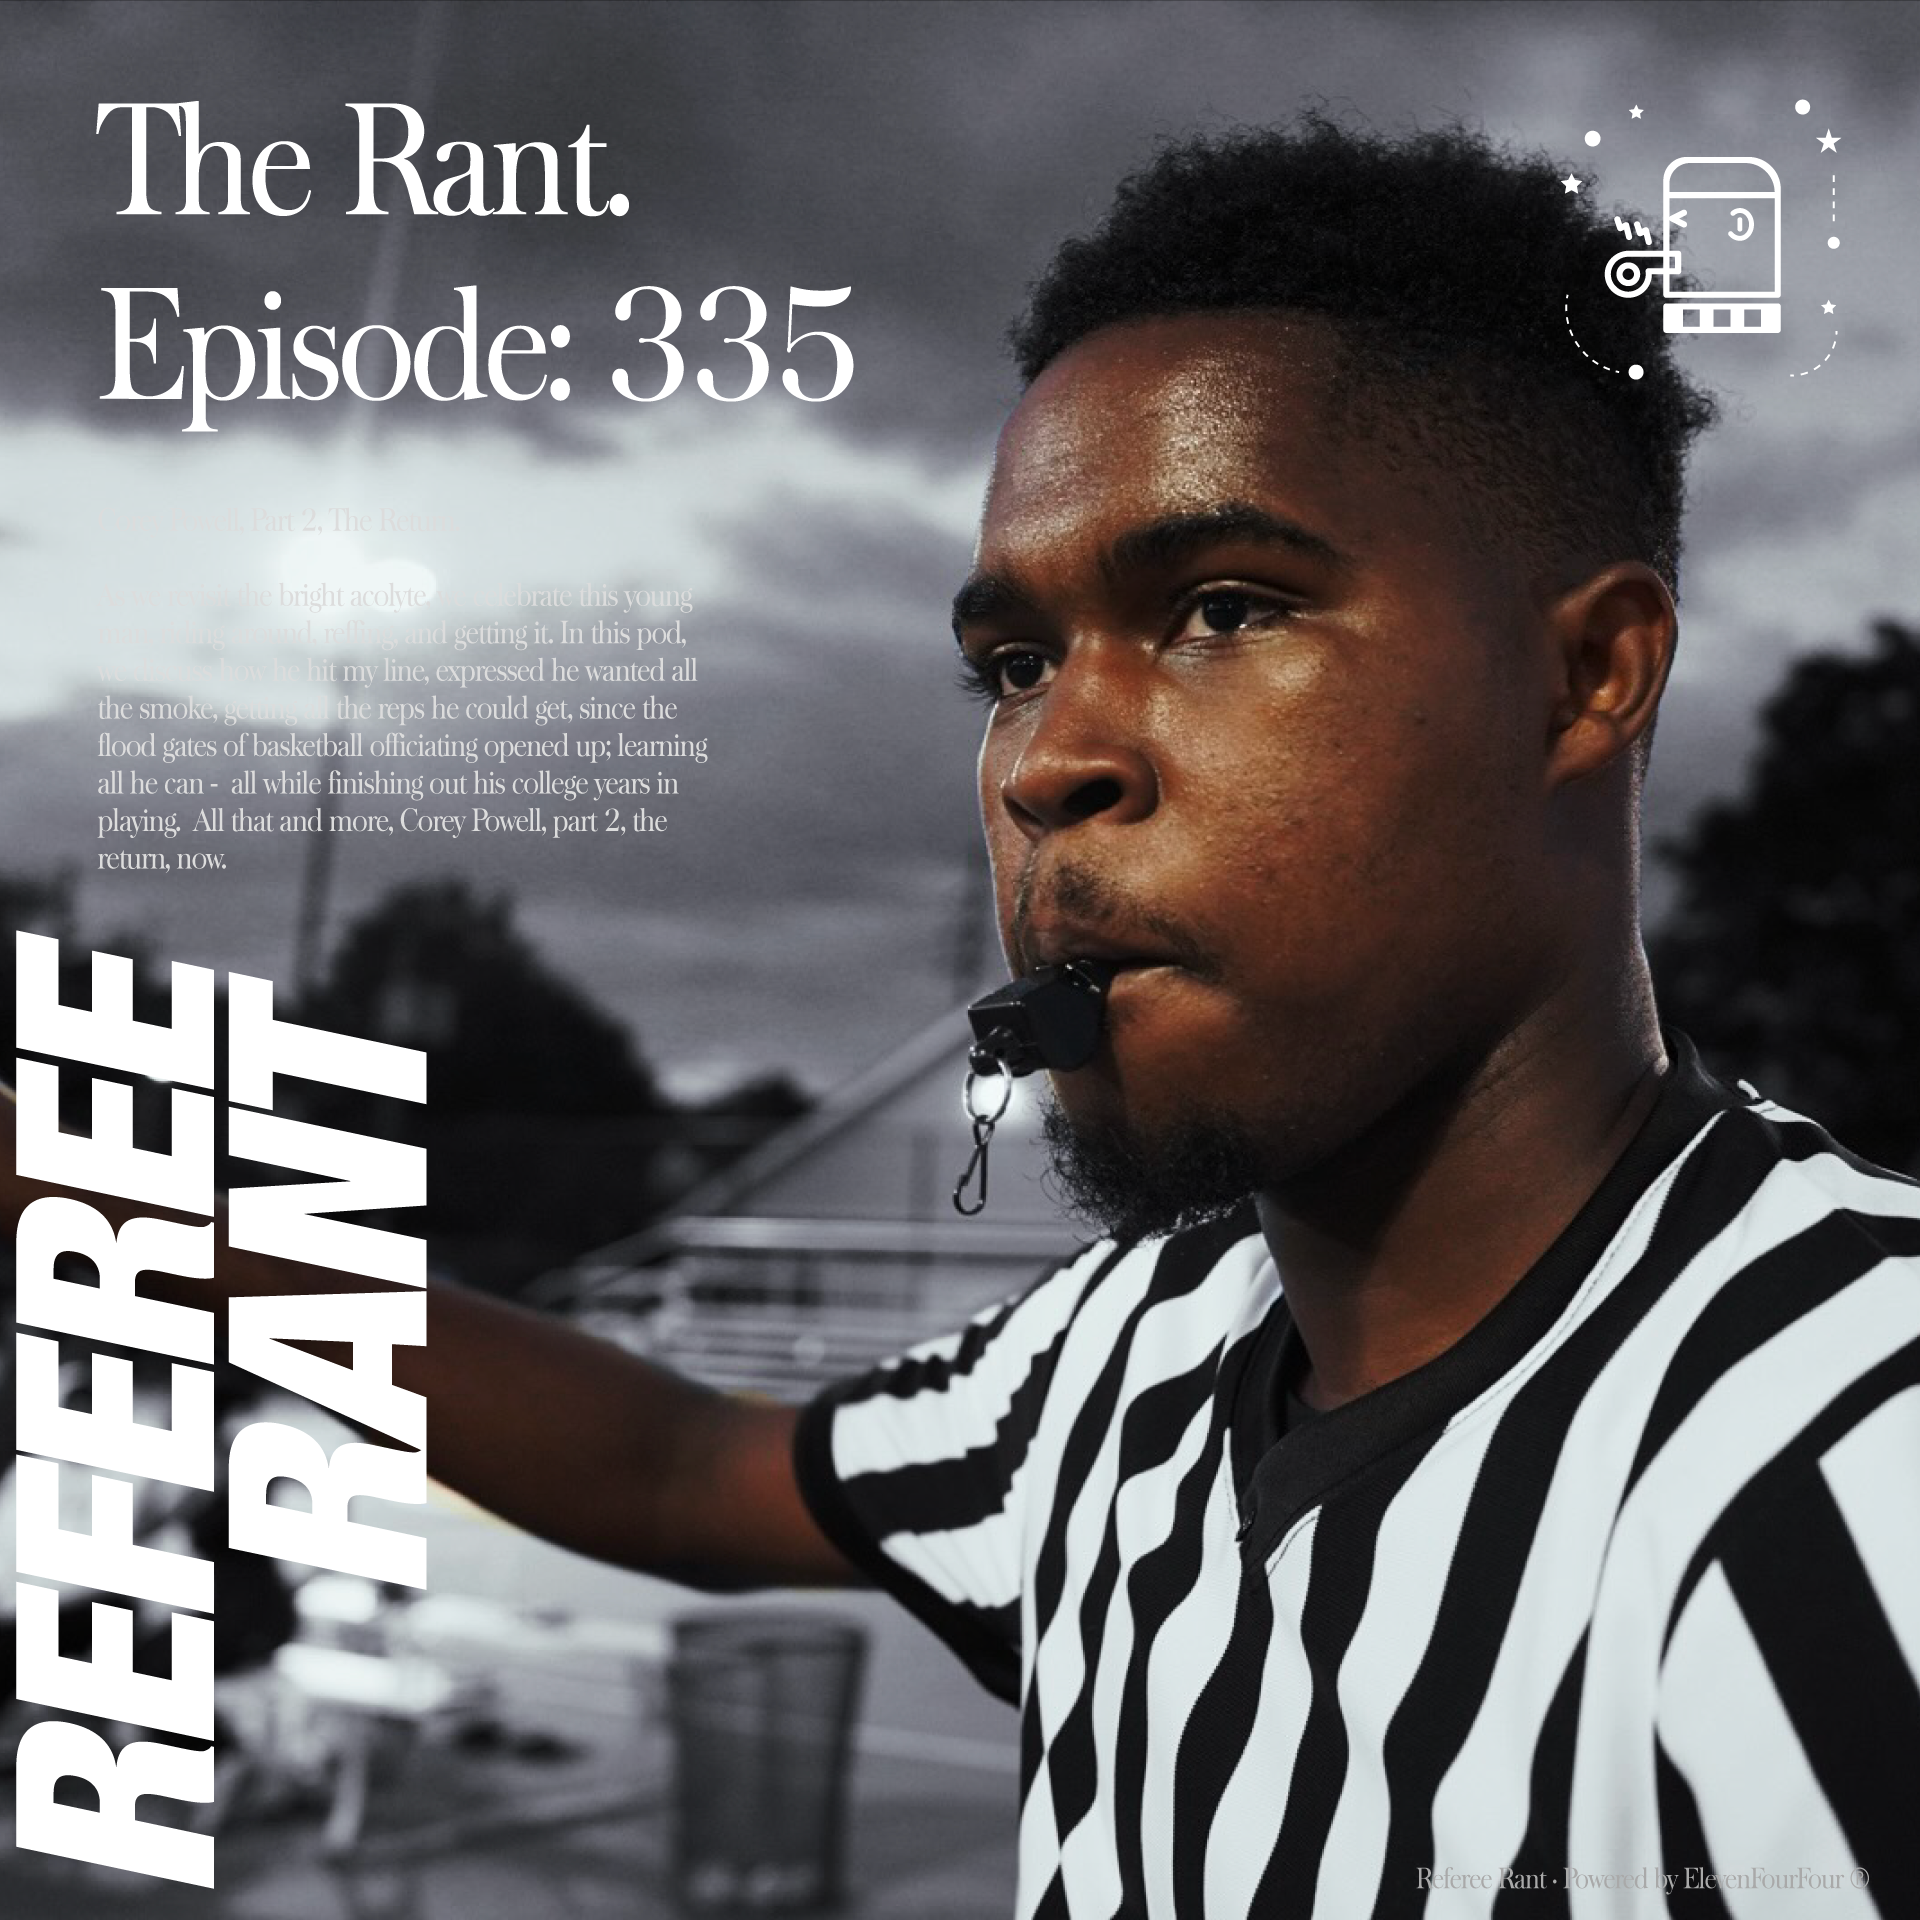 Episode 335, The Rant: Corey Powell, Part 2, The Return.